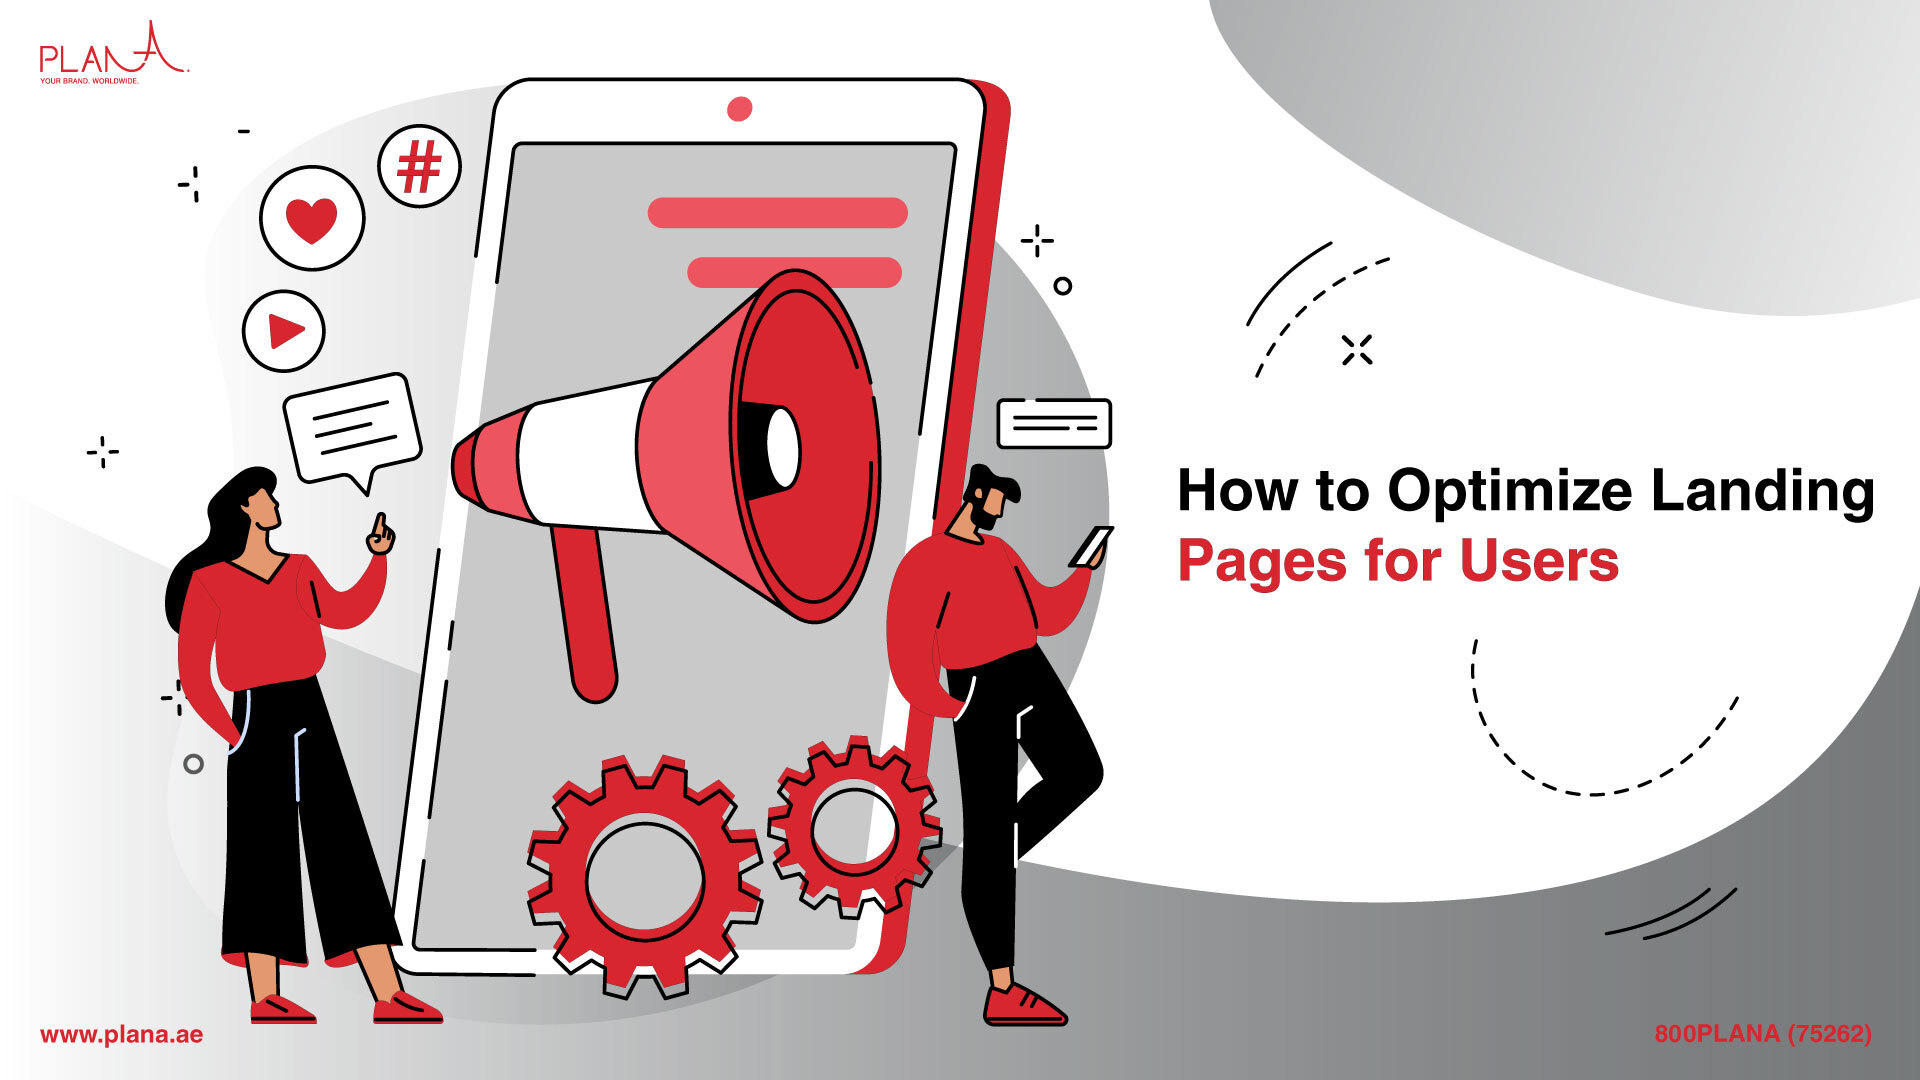 How to Optimize Landing Pages for Users?